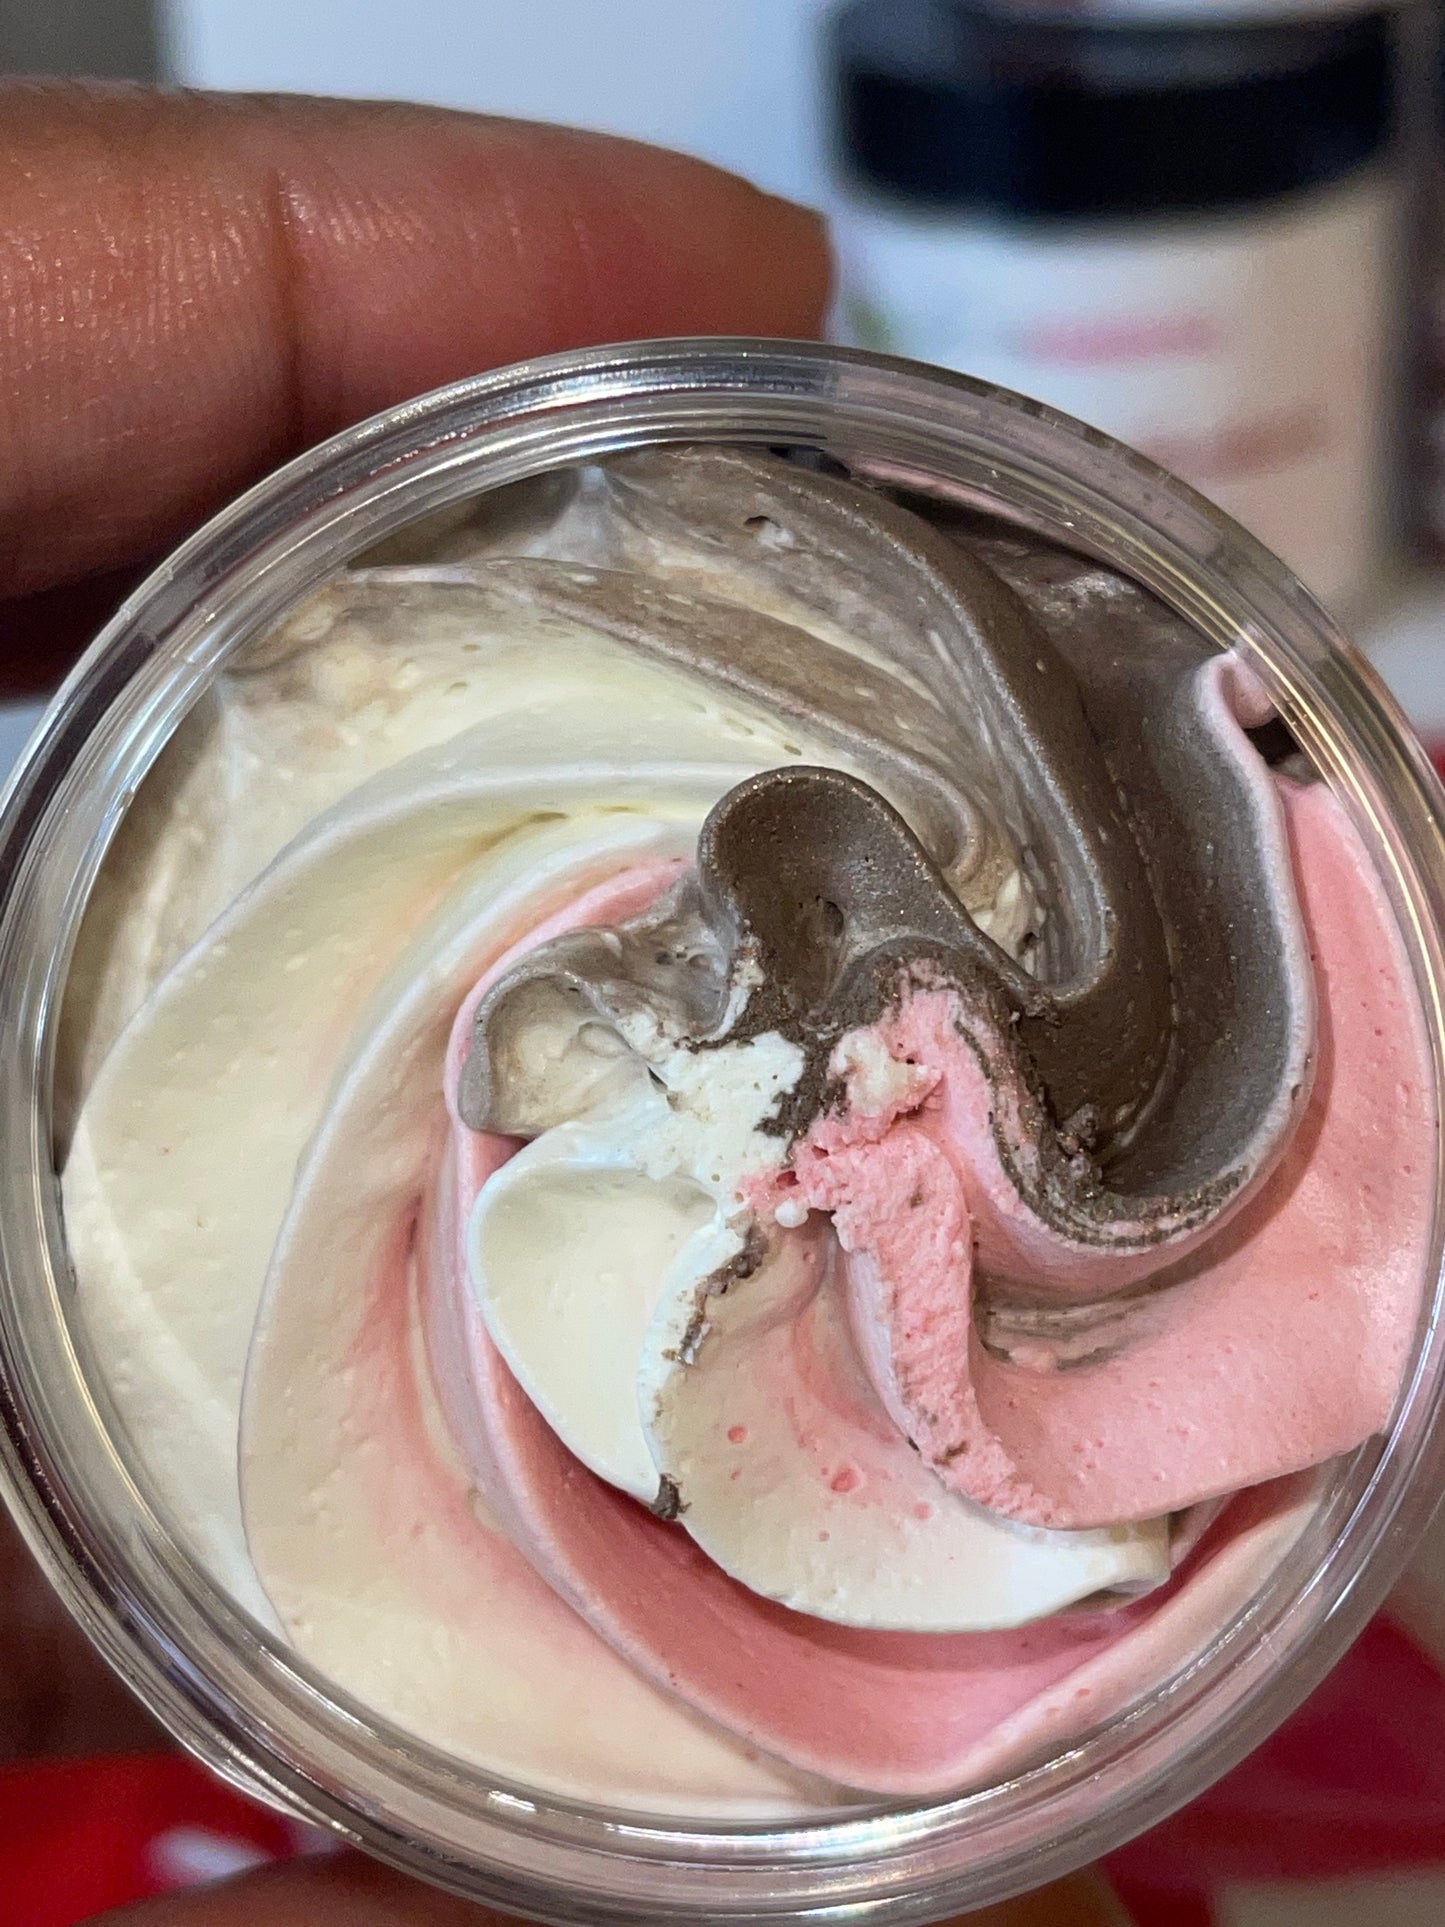 "Chocolate Covered Strawberries” Whipped Body Butter